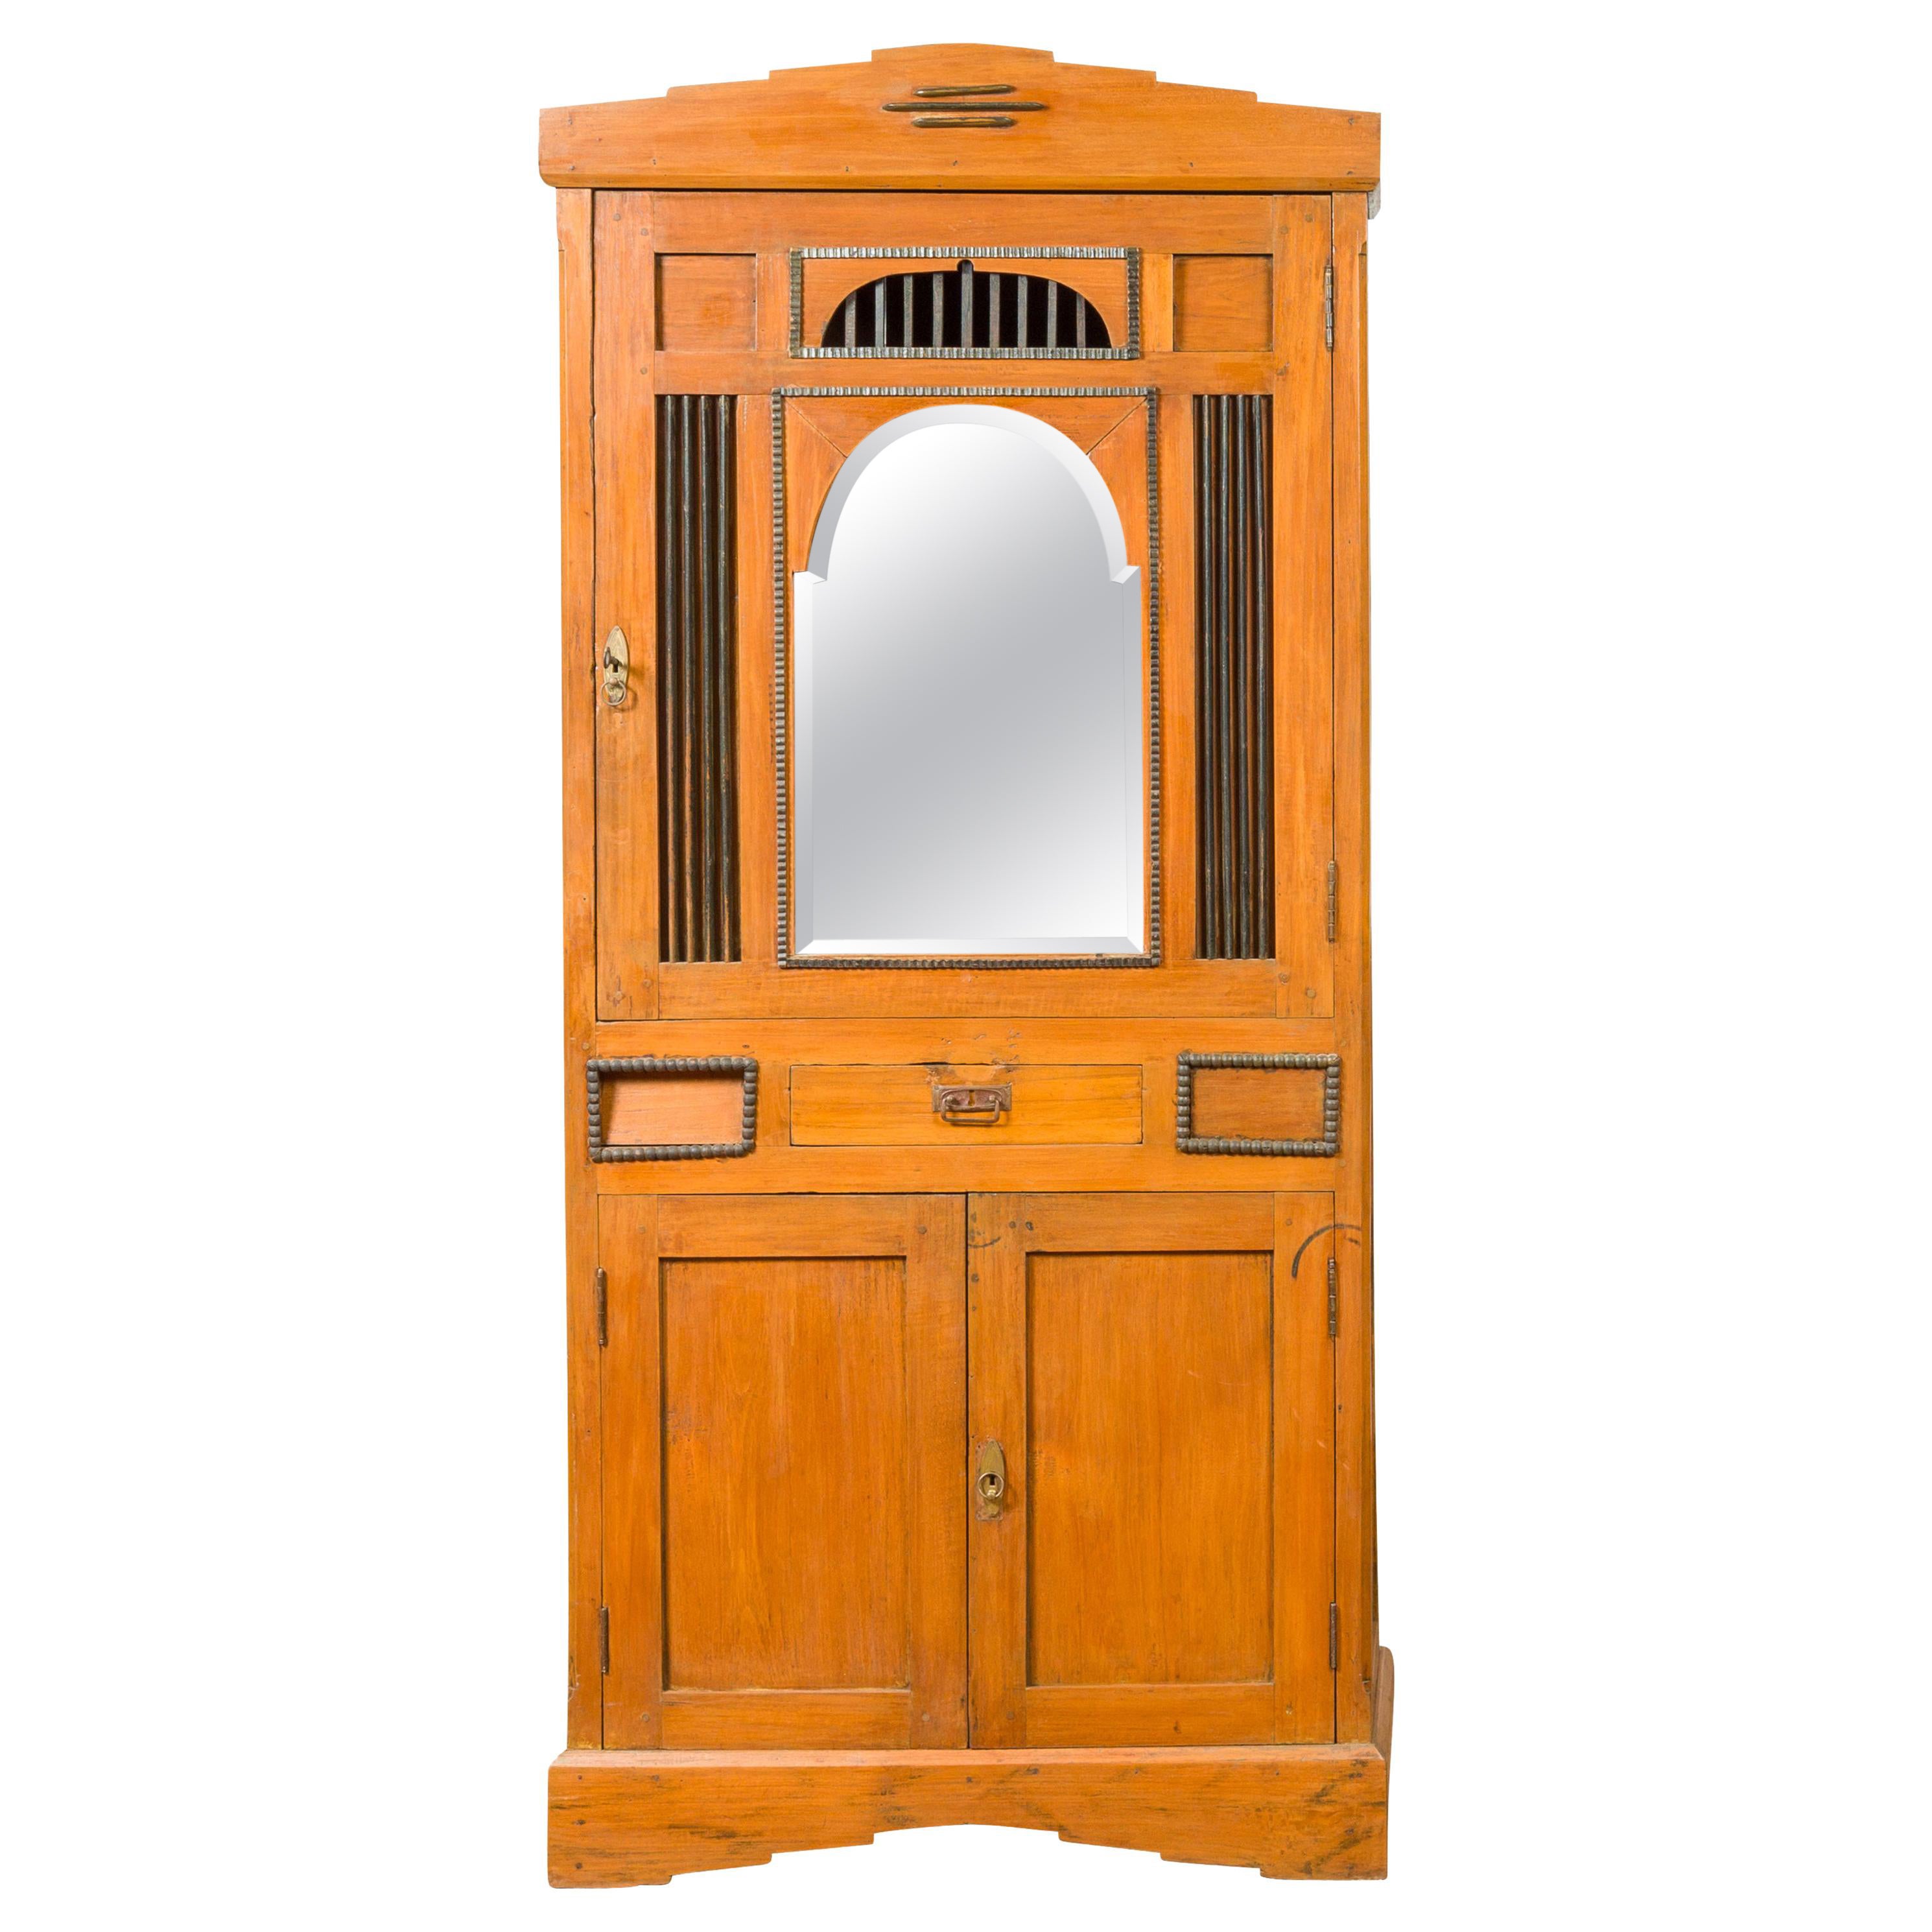 Art Deco Style Dutch Colonial Cabinet with Doors, Drawers and Mirrored Front For Sale